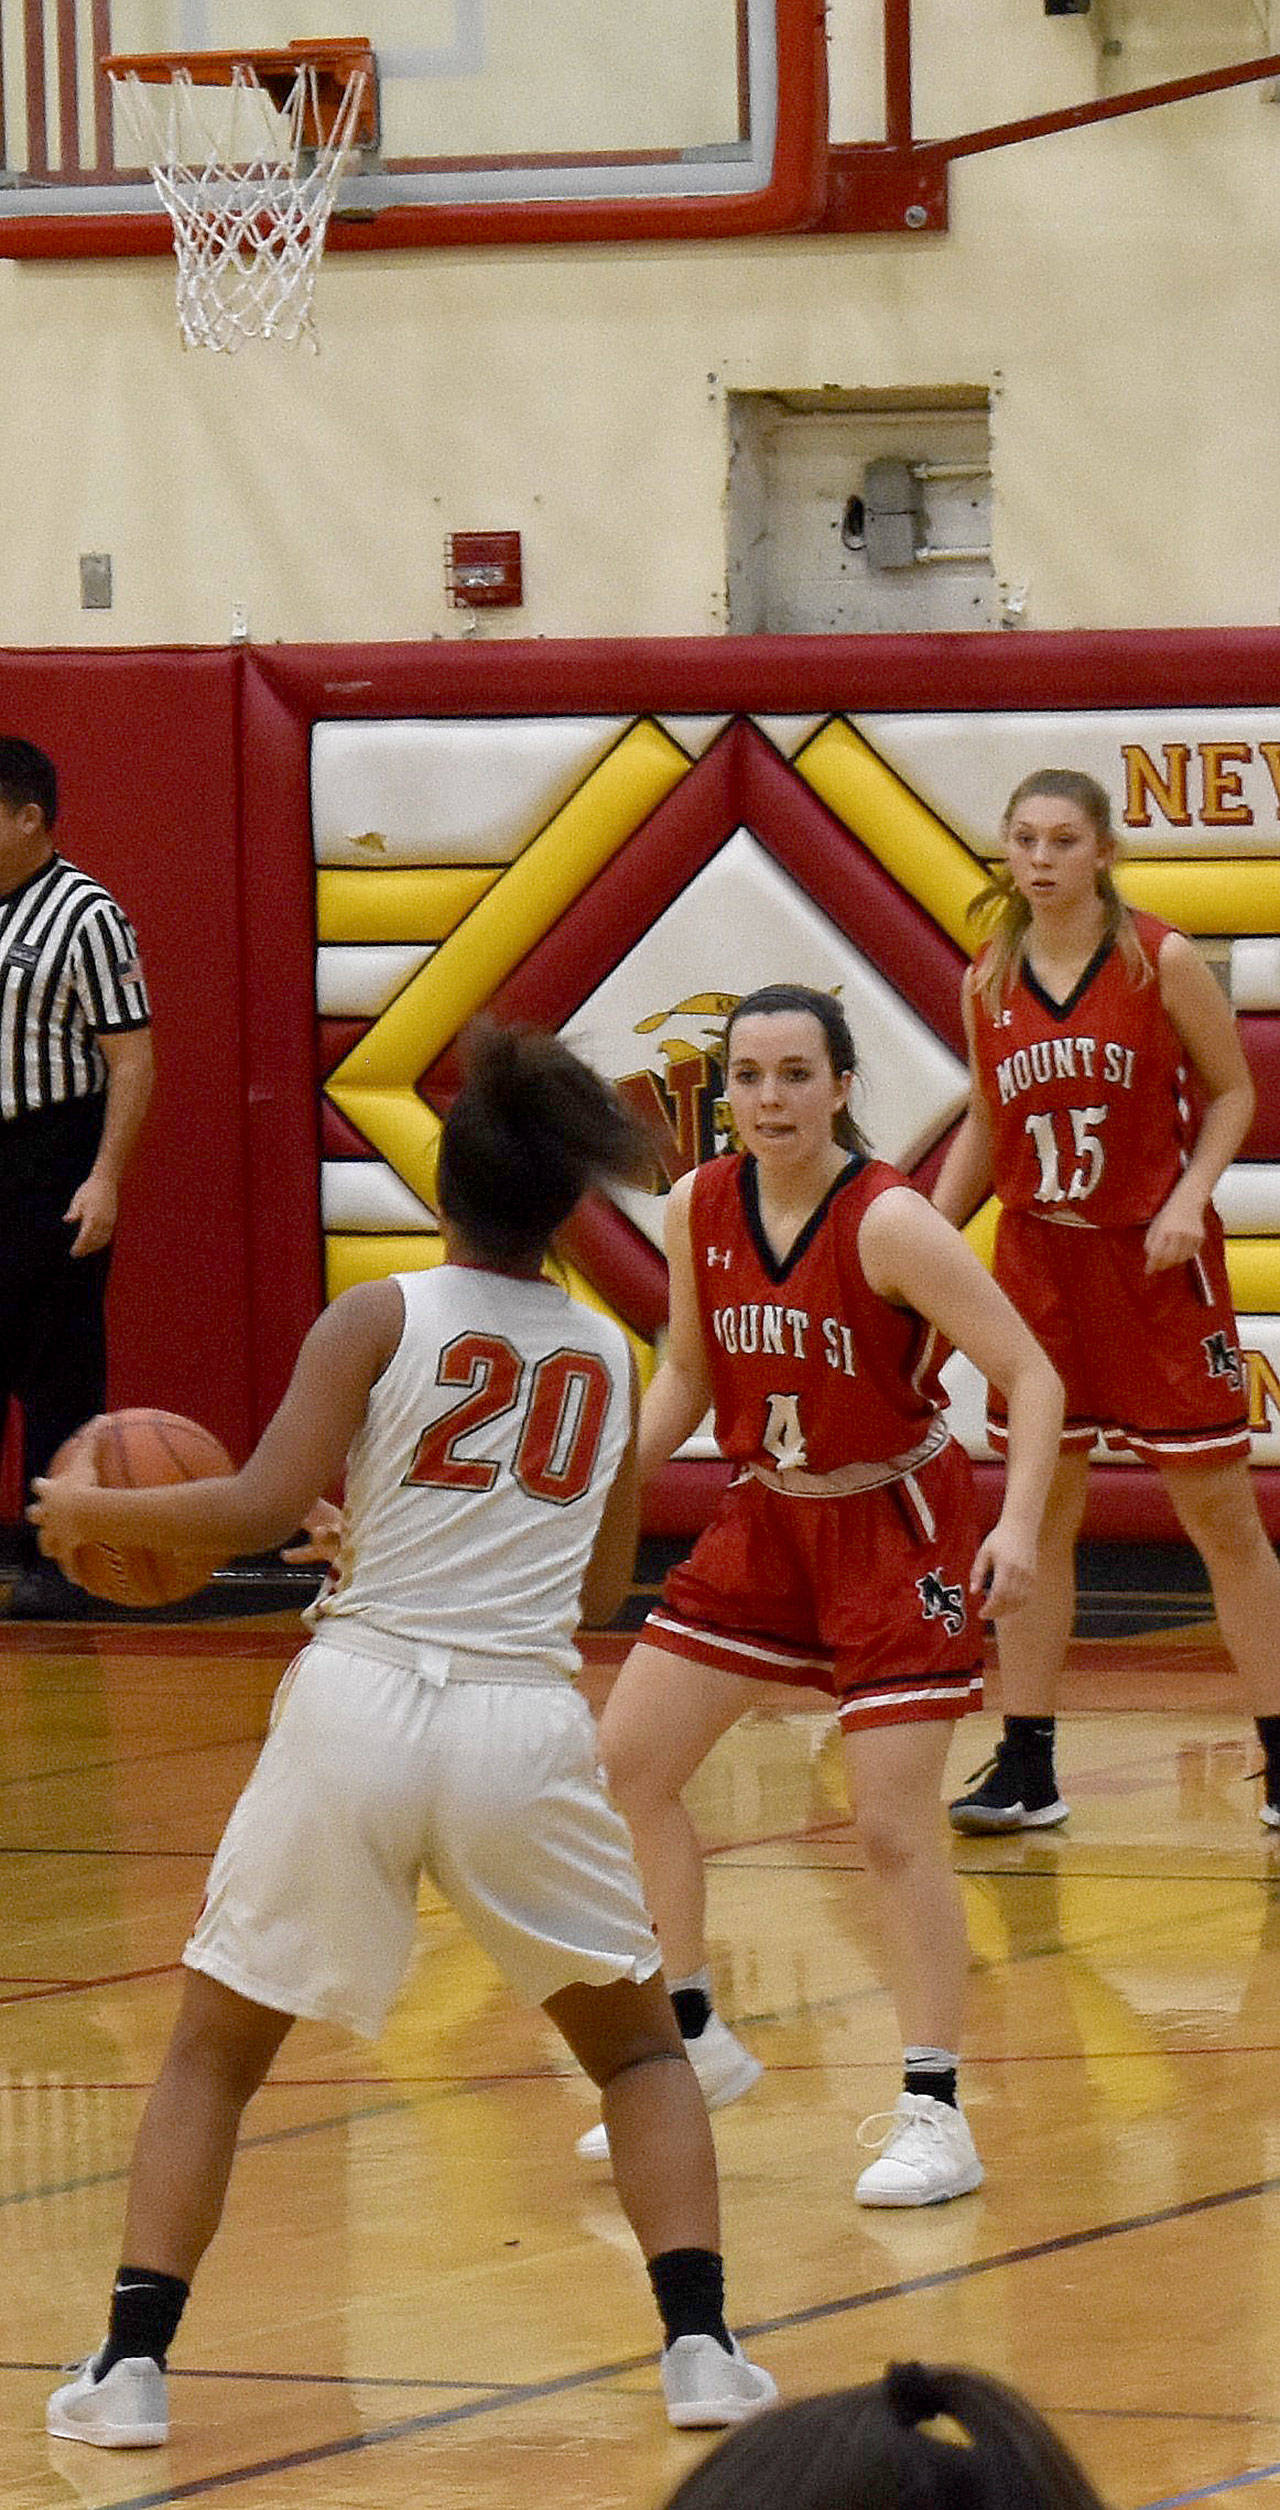 Jenae Usselman and Joelle Buck defend against a Newport scoring attempt. (Photo courtesy of Charles Samuelson)